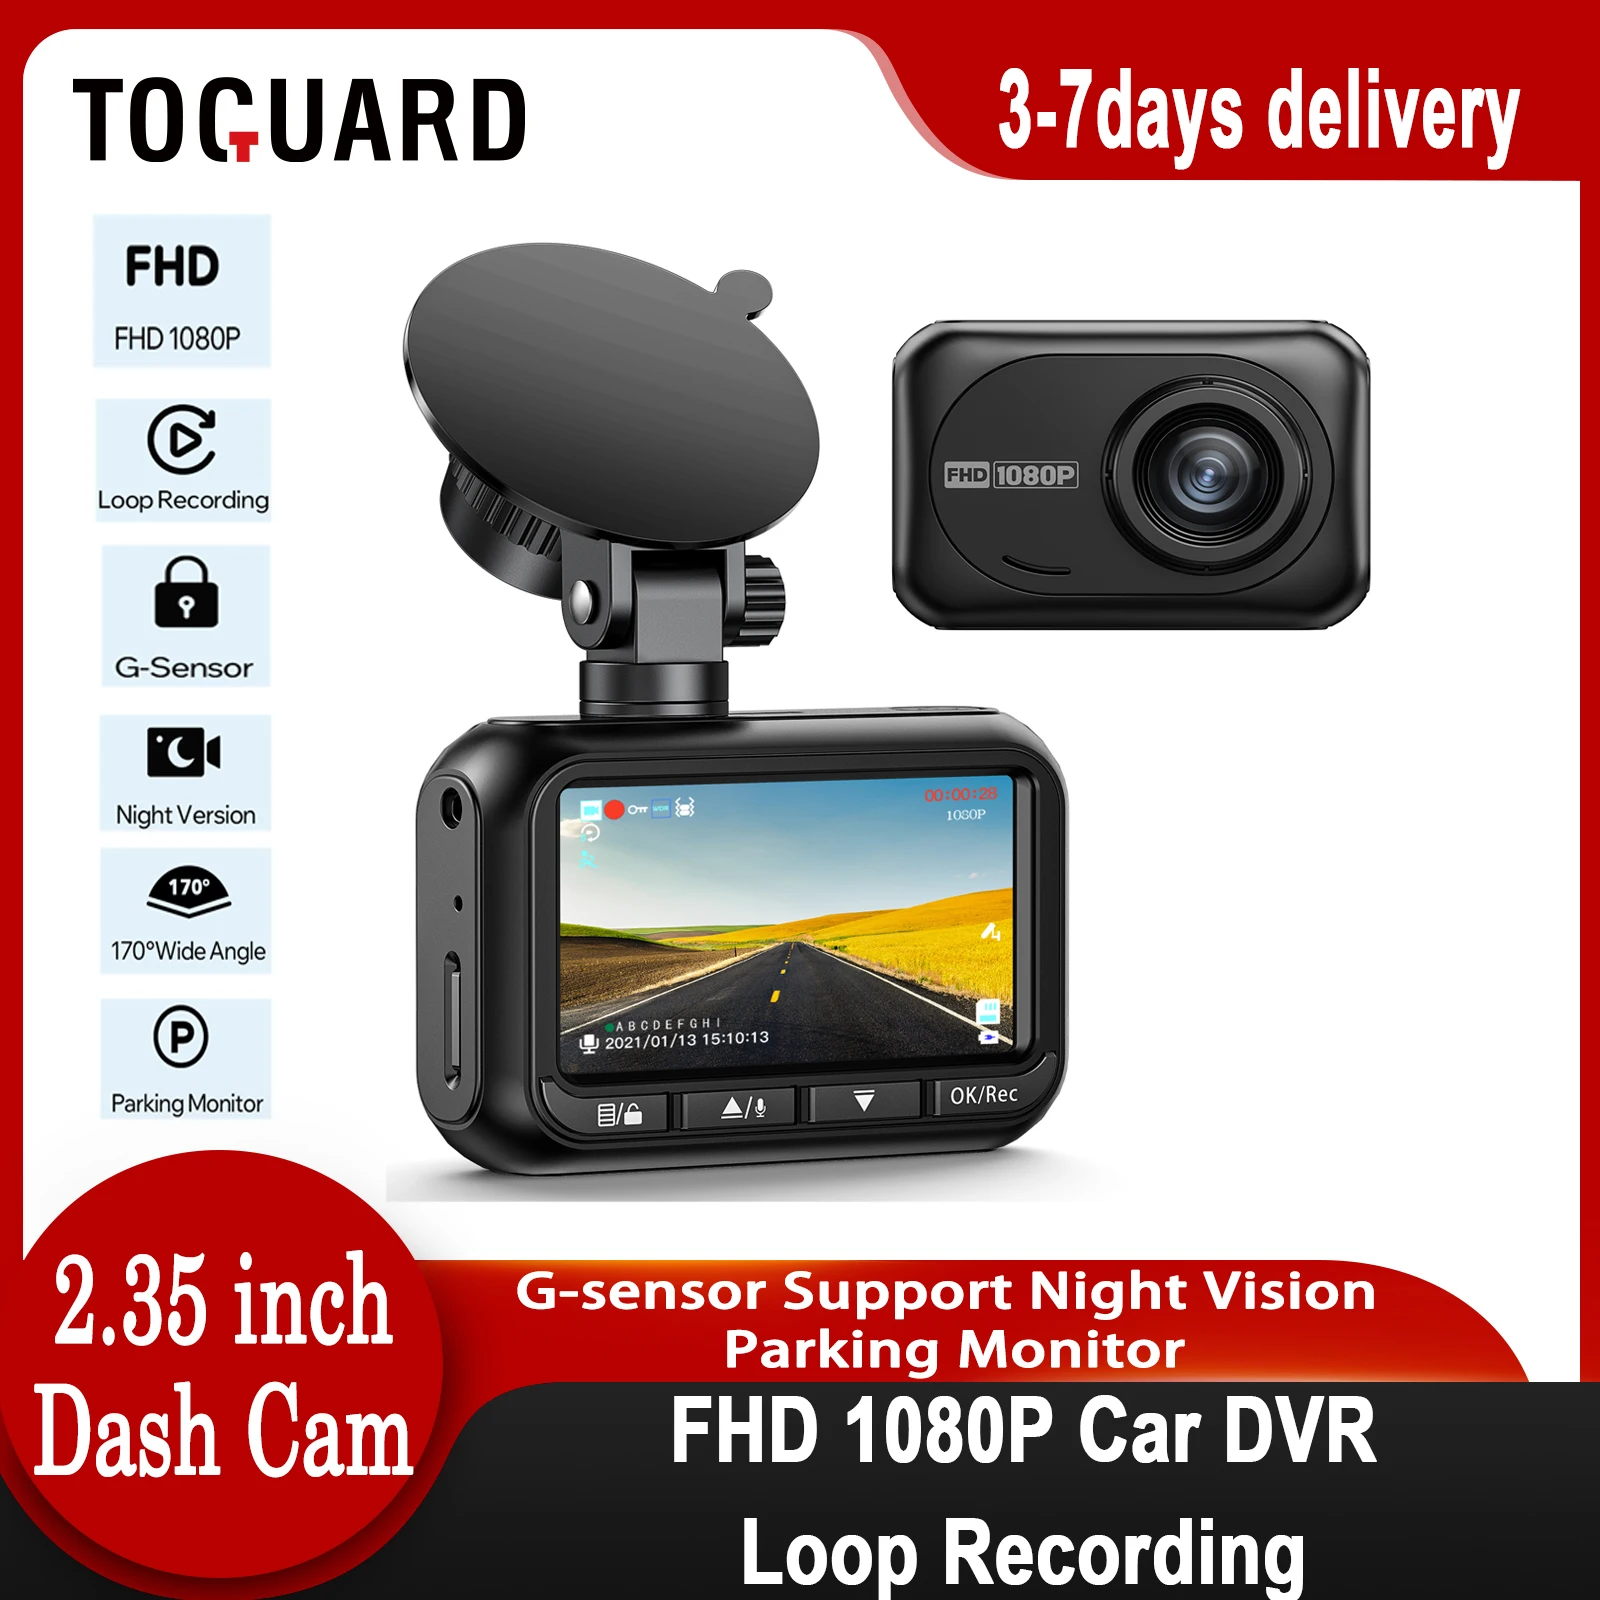 

TOGUARD DashCam for Car FHD 1080P Record Camera Loop Recording 170° Wide Angle G-sensor Support Night Vision Parking Monitor